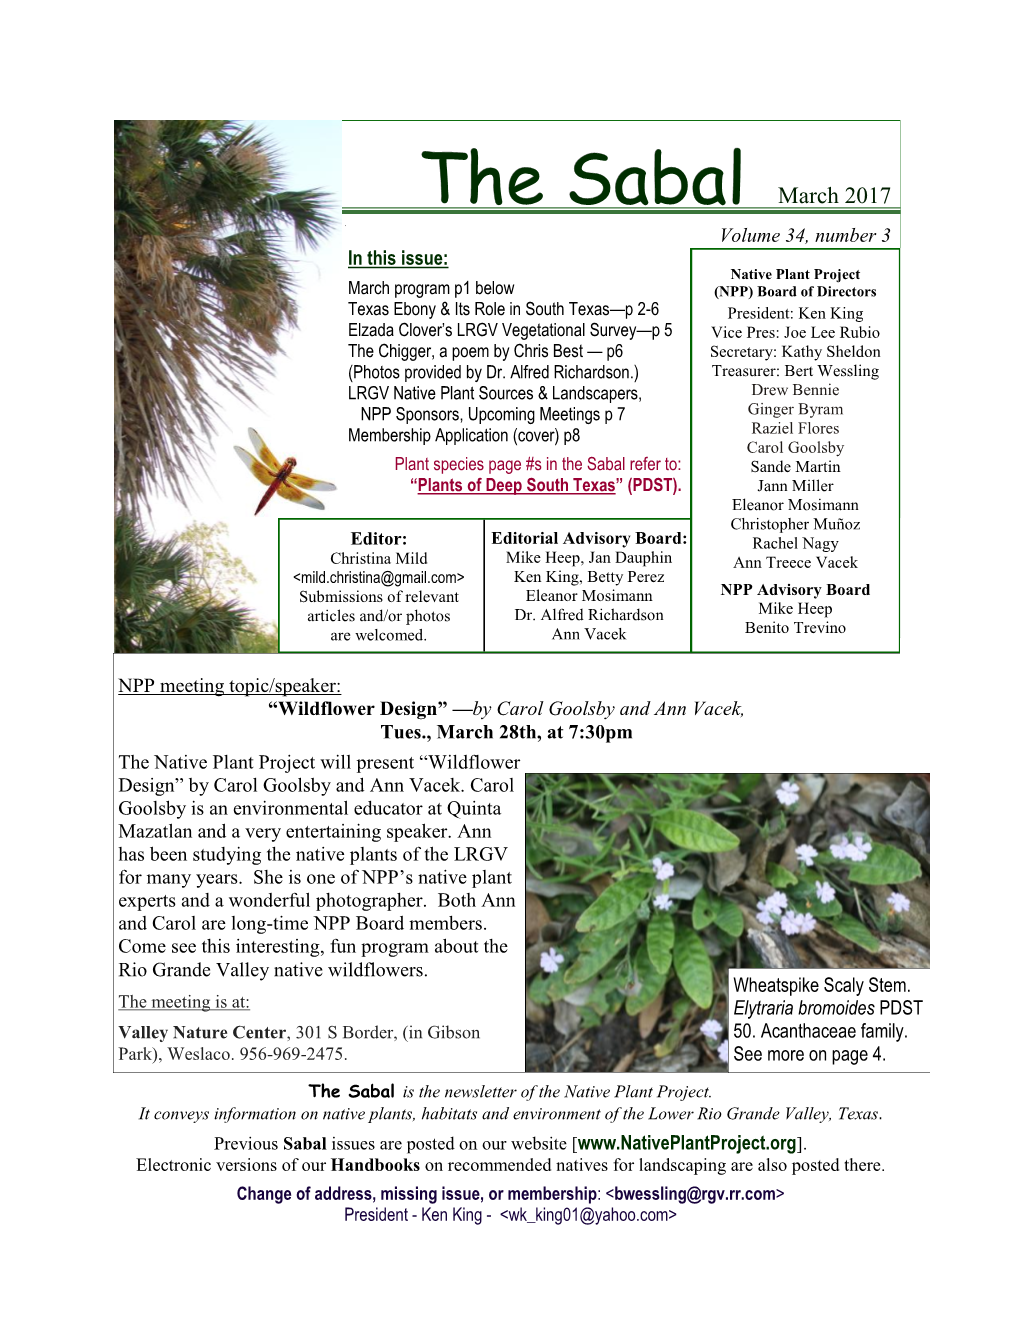 The Sabal March 2017 Volume 34, Number 3